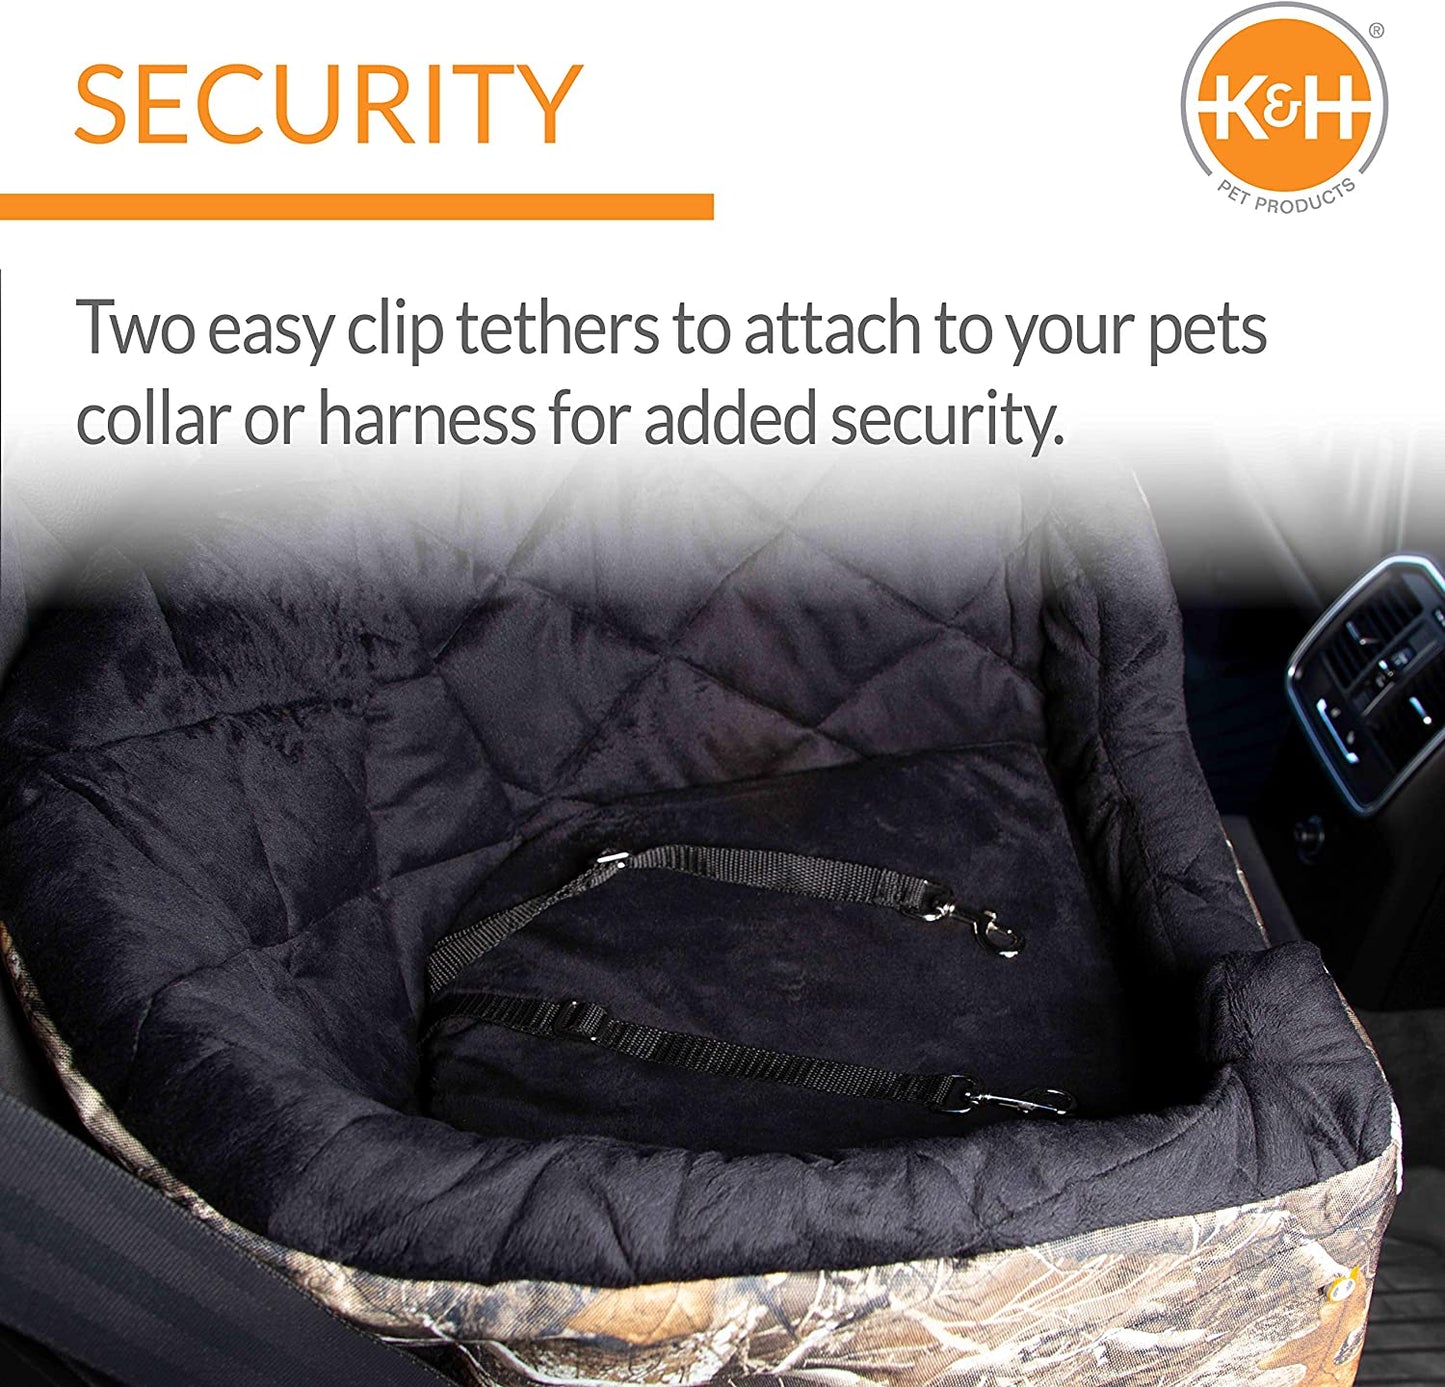 K&H Pet Products Bucket Booster Dog Car Seat with Dog Seat Belt for Car, Washable Small Dog Car Seat, Sturdy Dog Booster Seats for Small Dogs, Medium Dogs, 2 Safety Leashes, Large Realtree Edge Camo